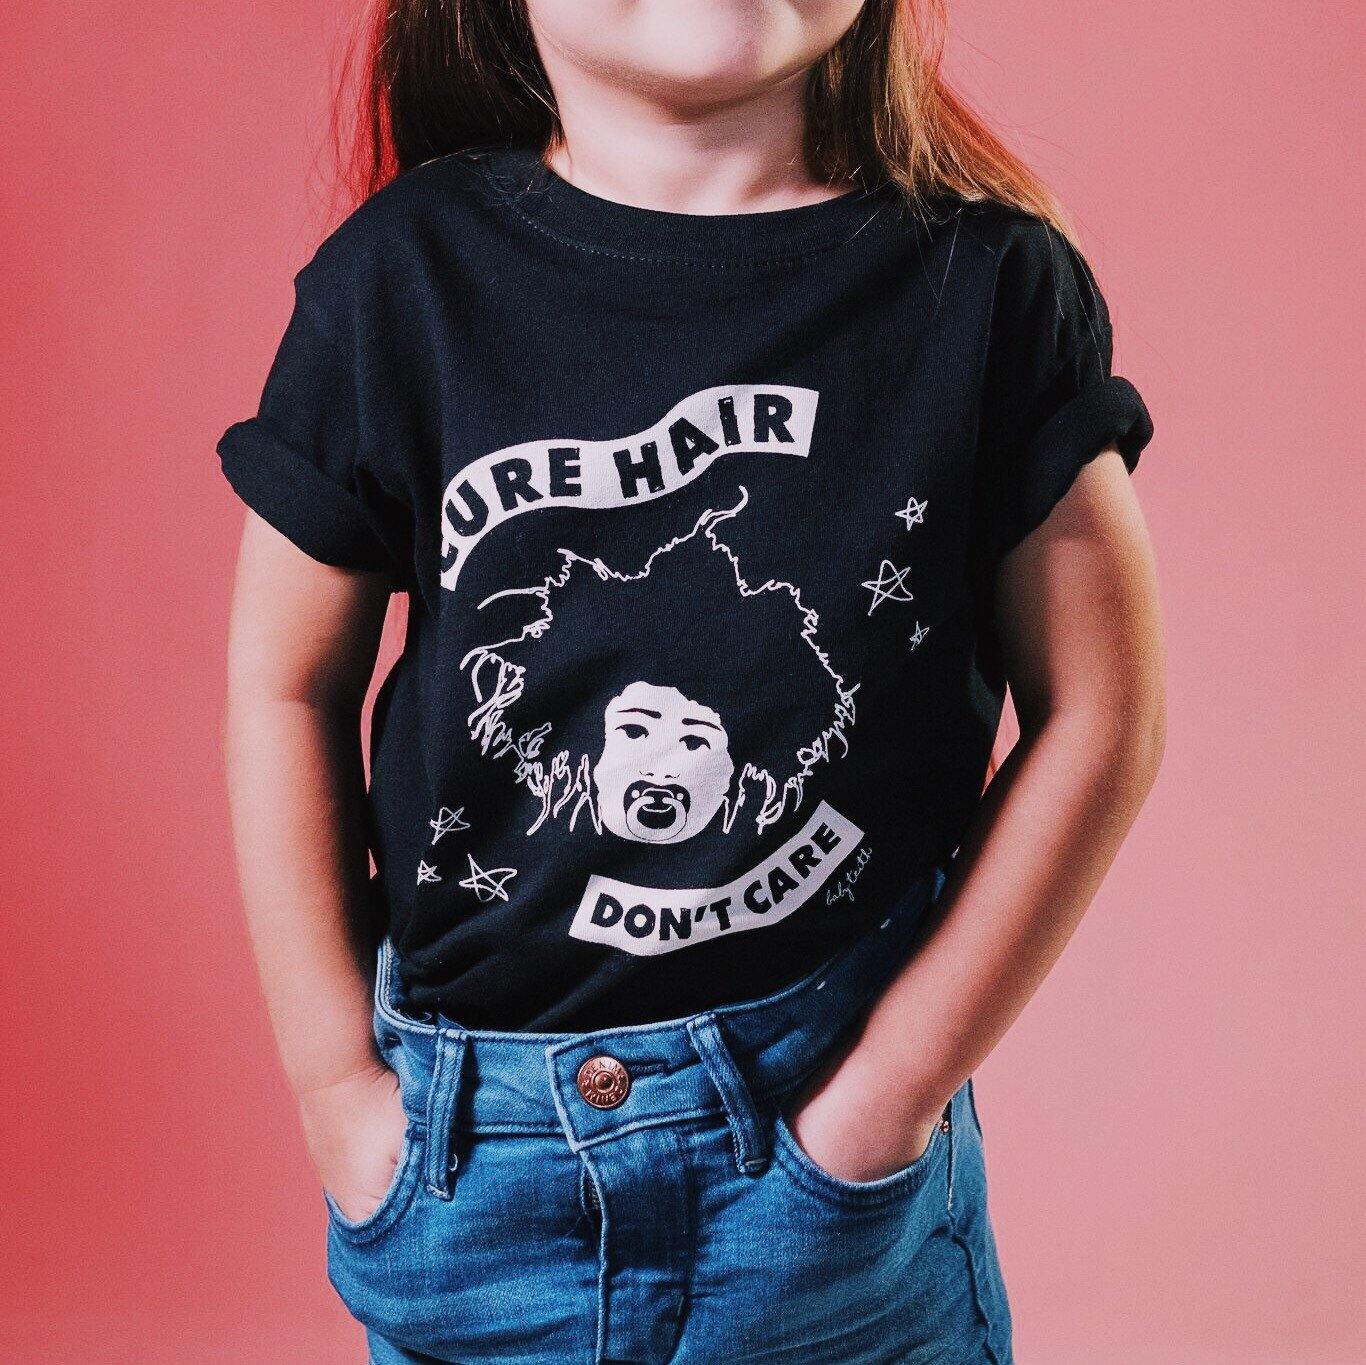 "Cure Hair Don't Care" Tee for Kids - Baby Teith